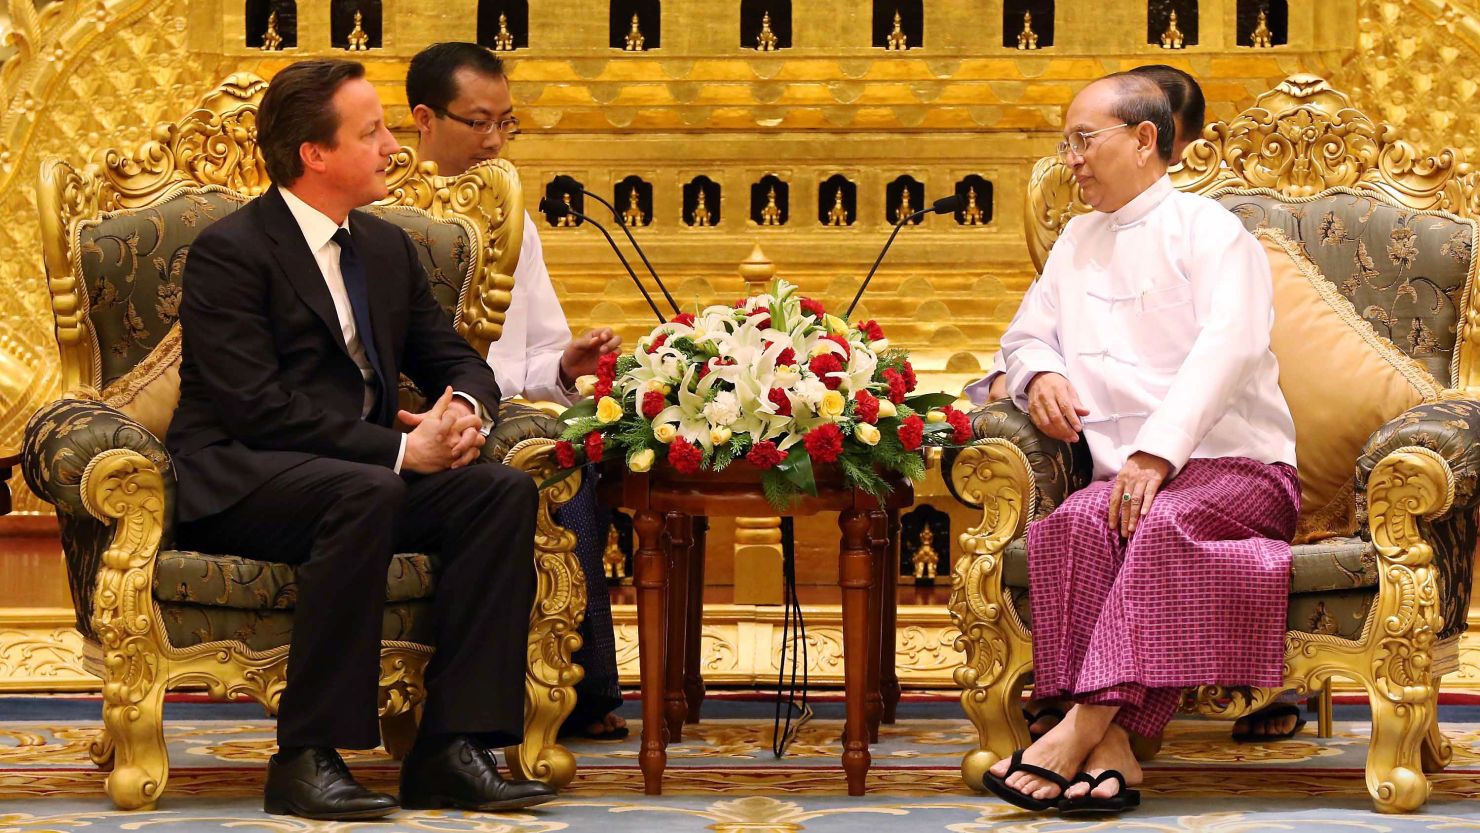 British Prime Minister David Cameron meets with Thein Sein, the president of Myanmar, on Friday.